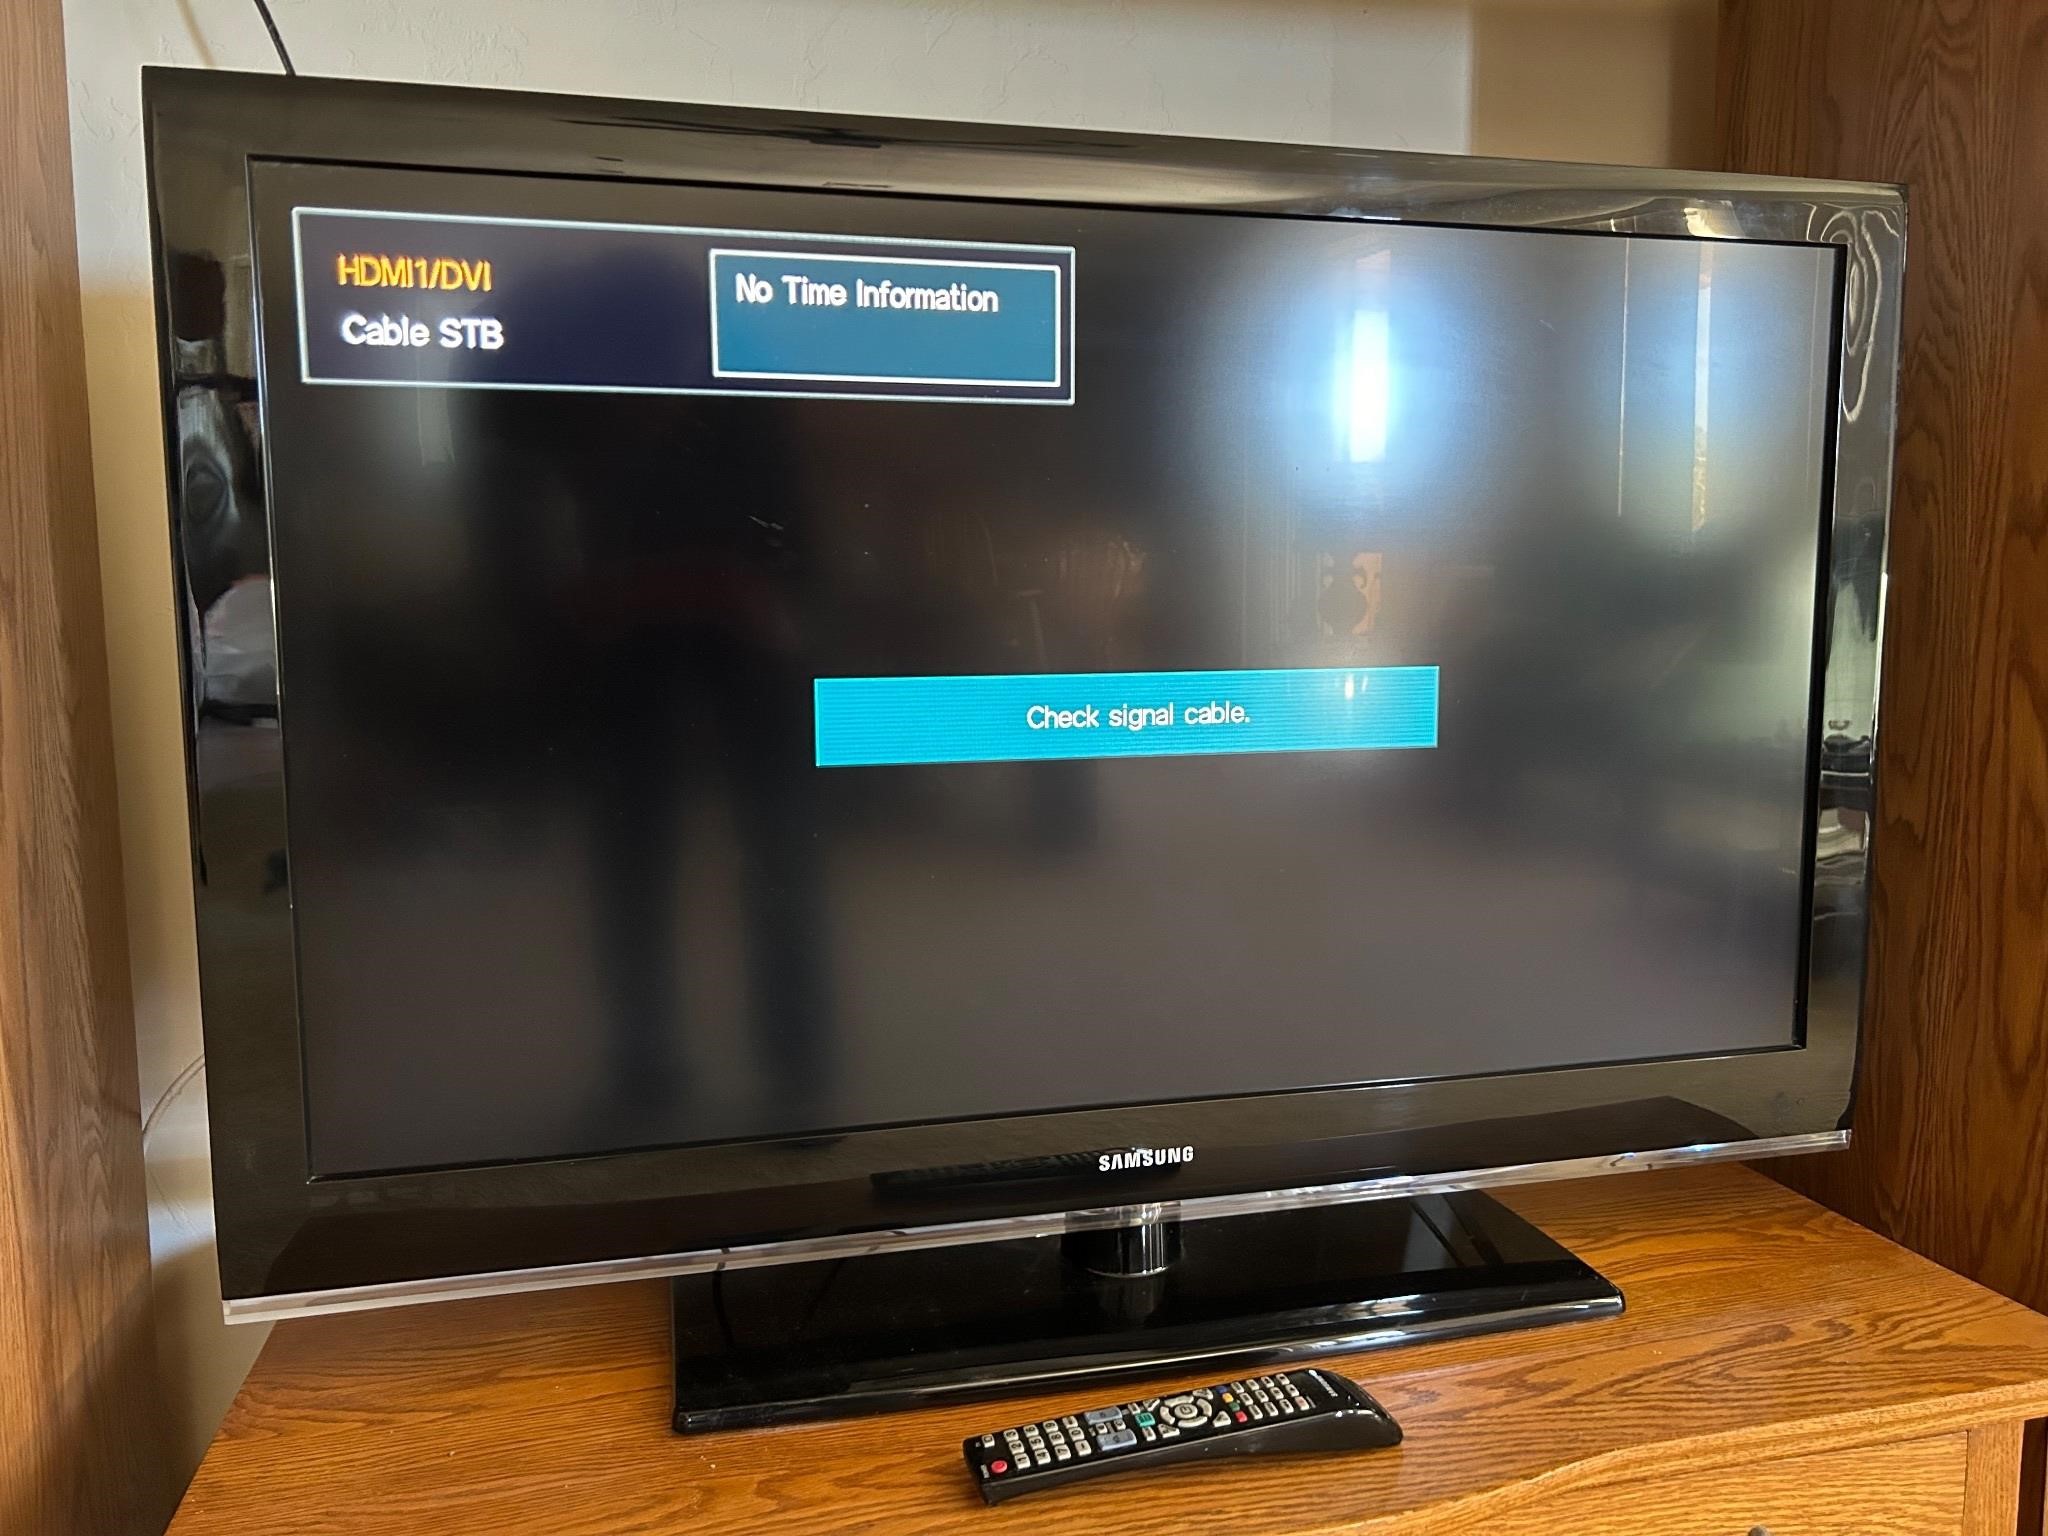 46” Samsung TV with Remote